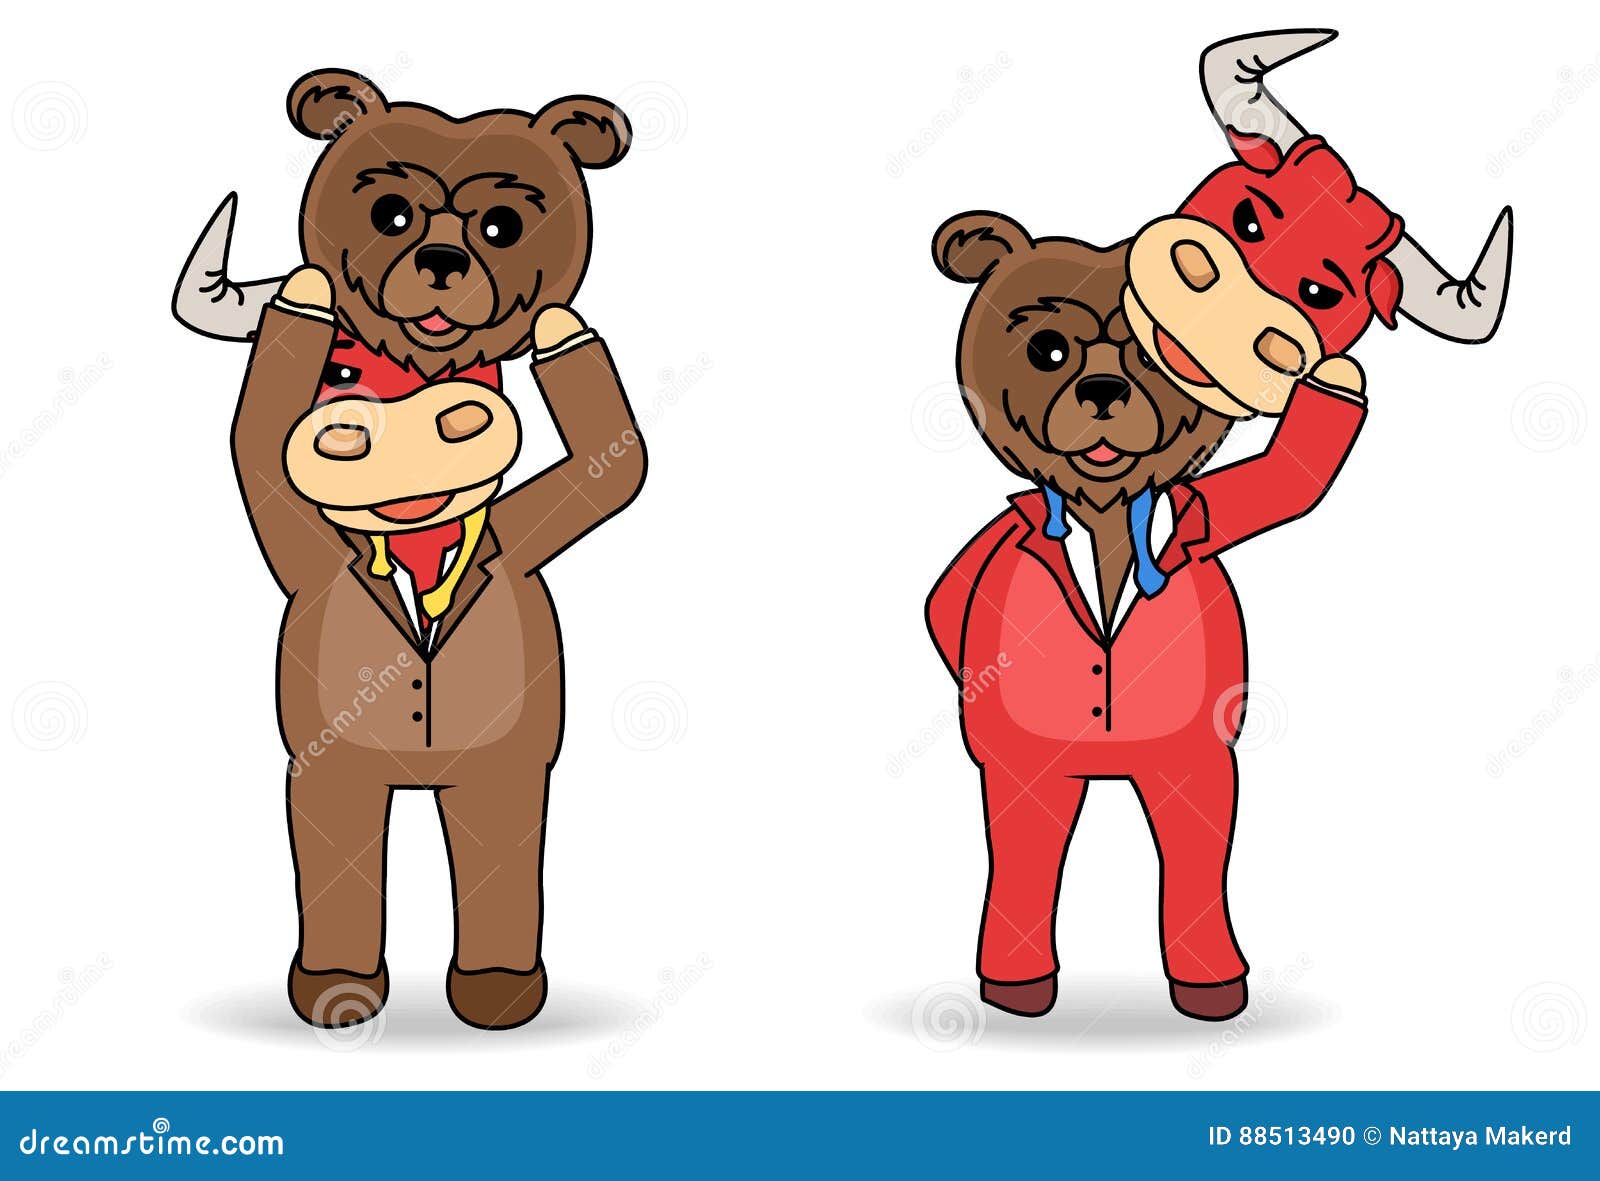 disguised bear and bull mask under rival his shirt. stock market concept.